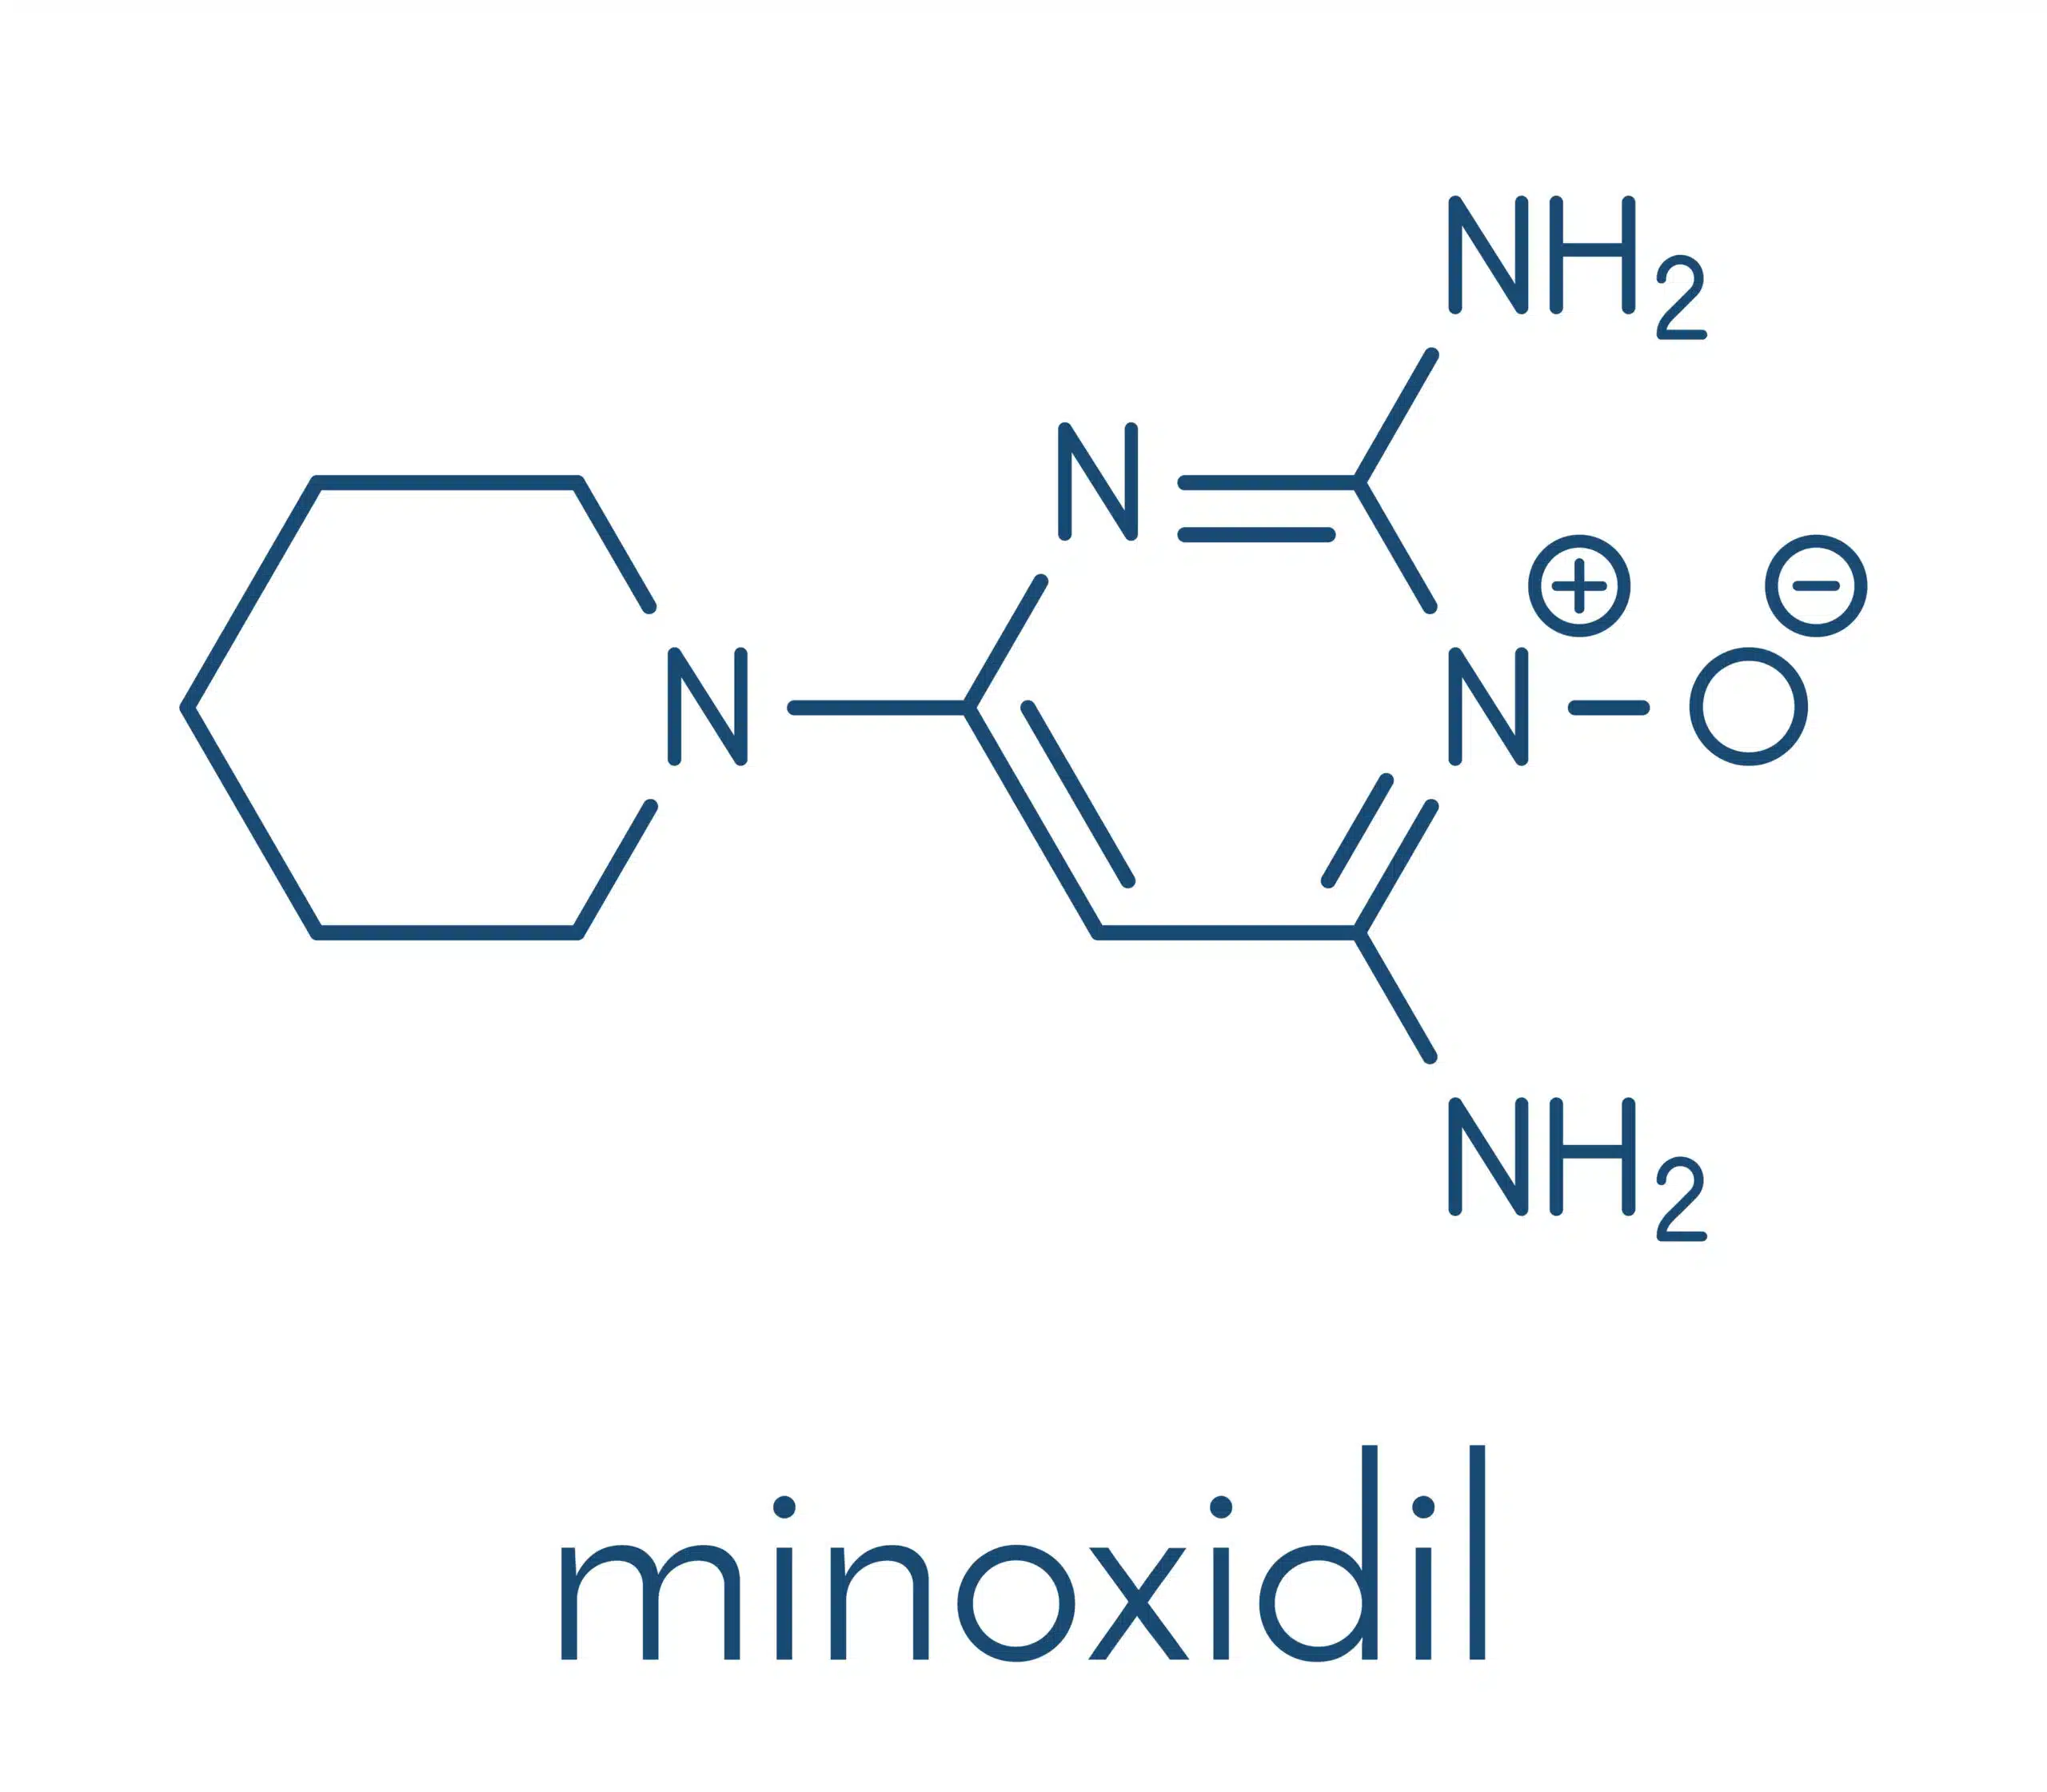 The low dose chemical structure of minoxidil for hair loss.